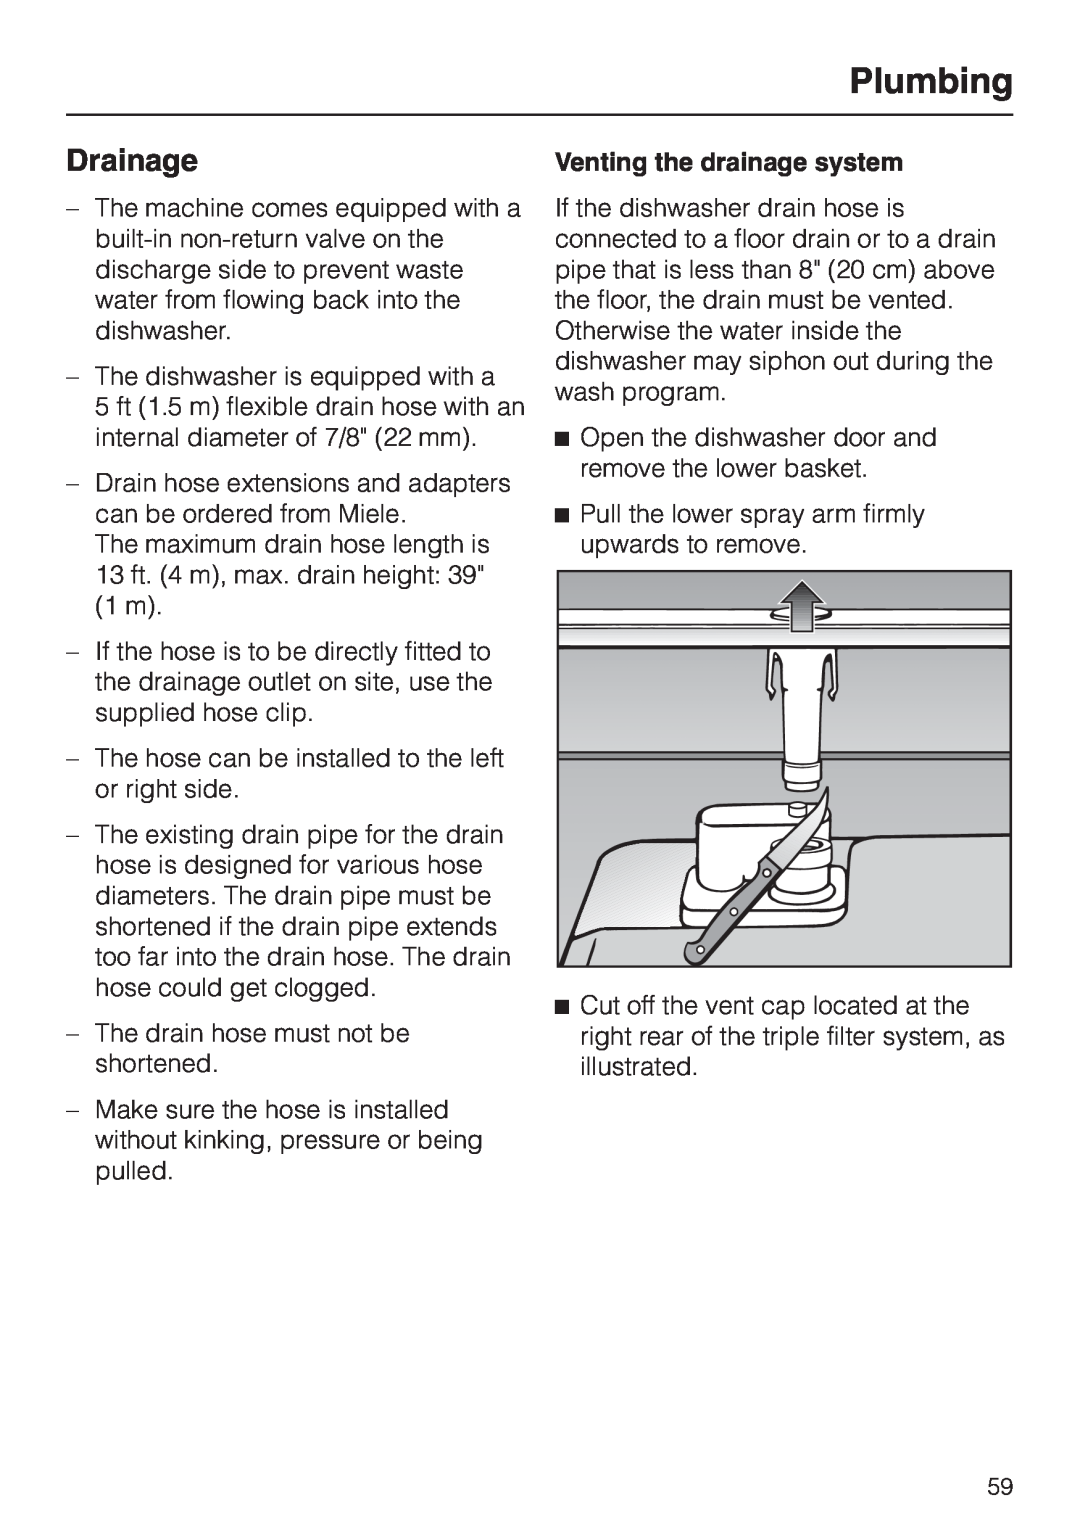 Miele G1470, G2470 operating instructions Drainage, Plumbing, Venting the drainage system 